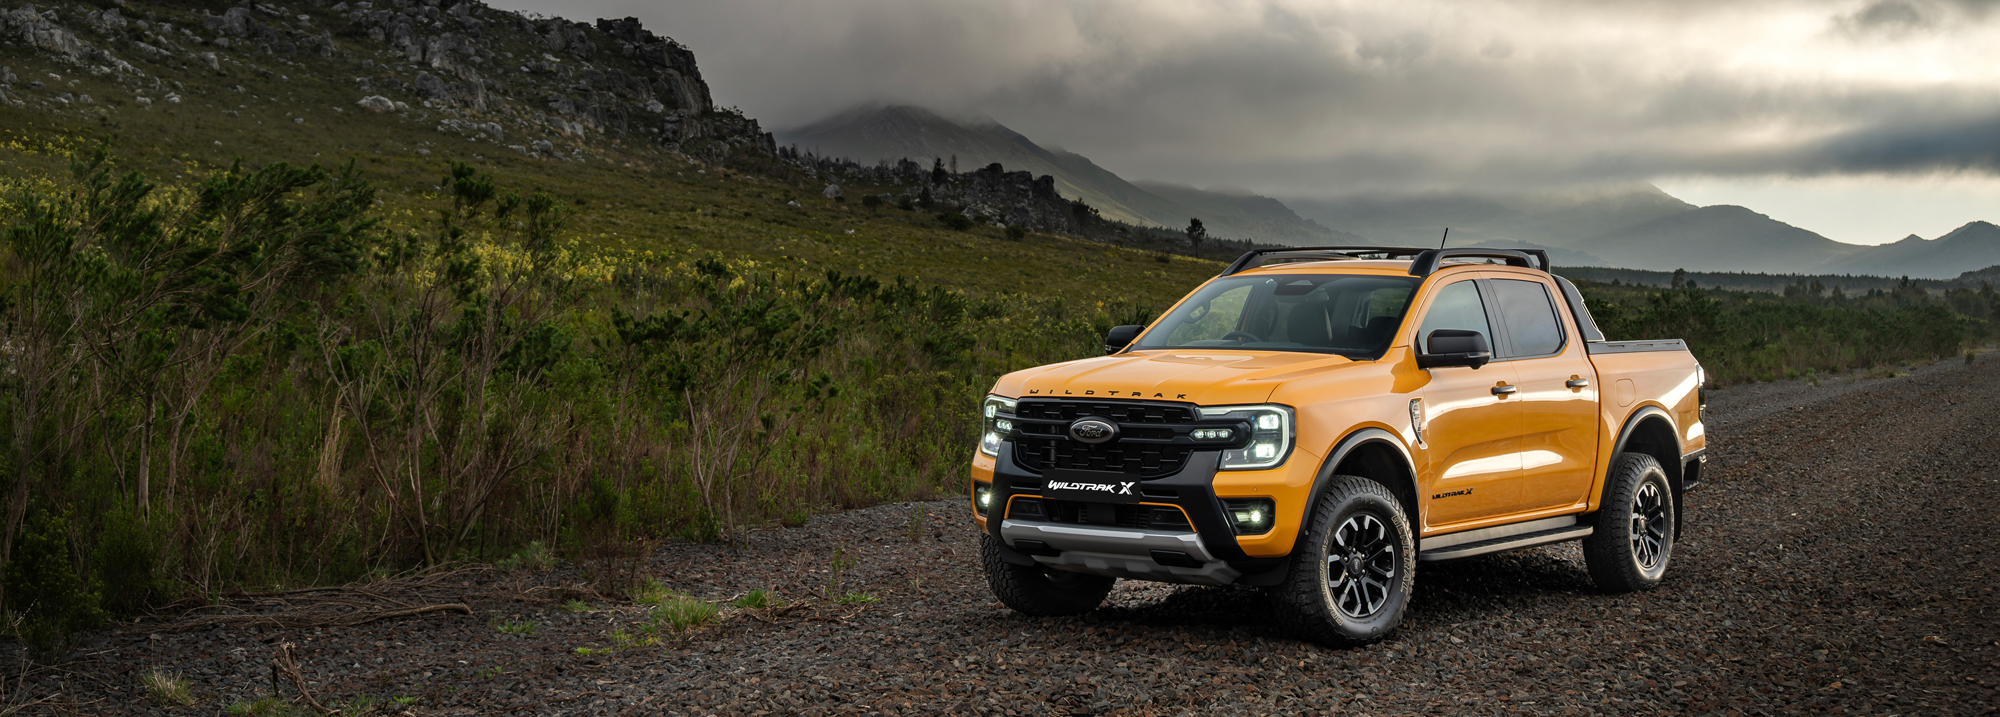 Off-road ready Ford Ranger Wildtrak X goes on sale